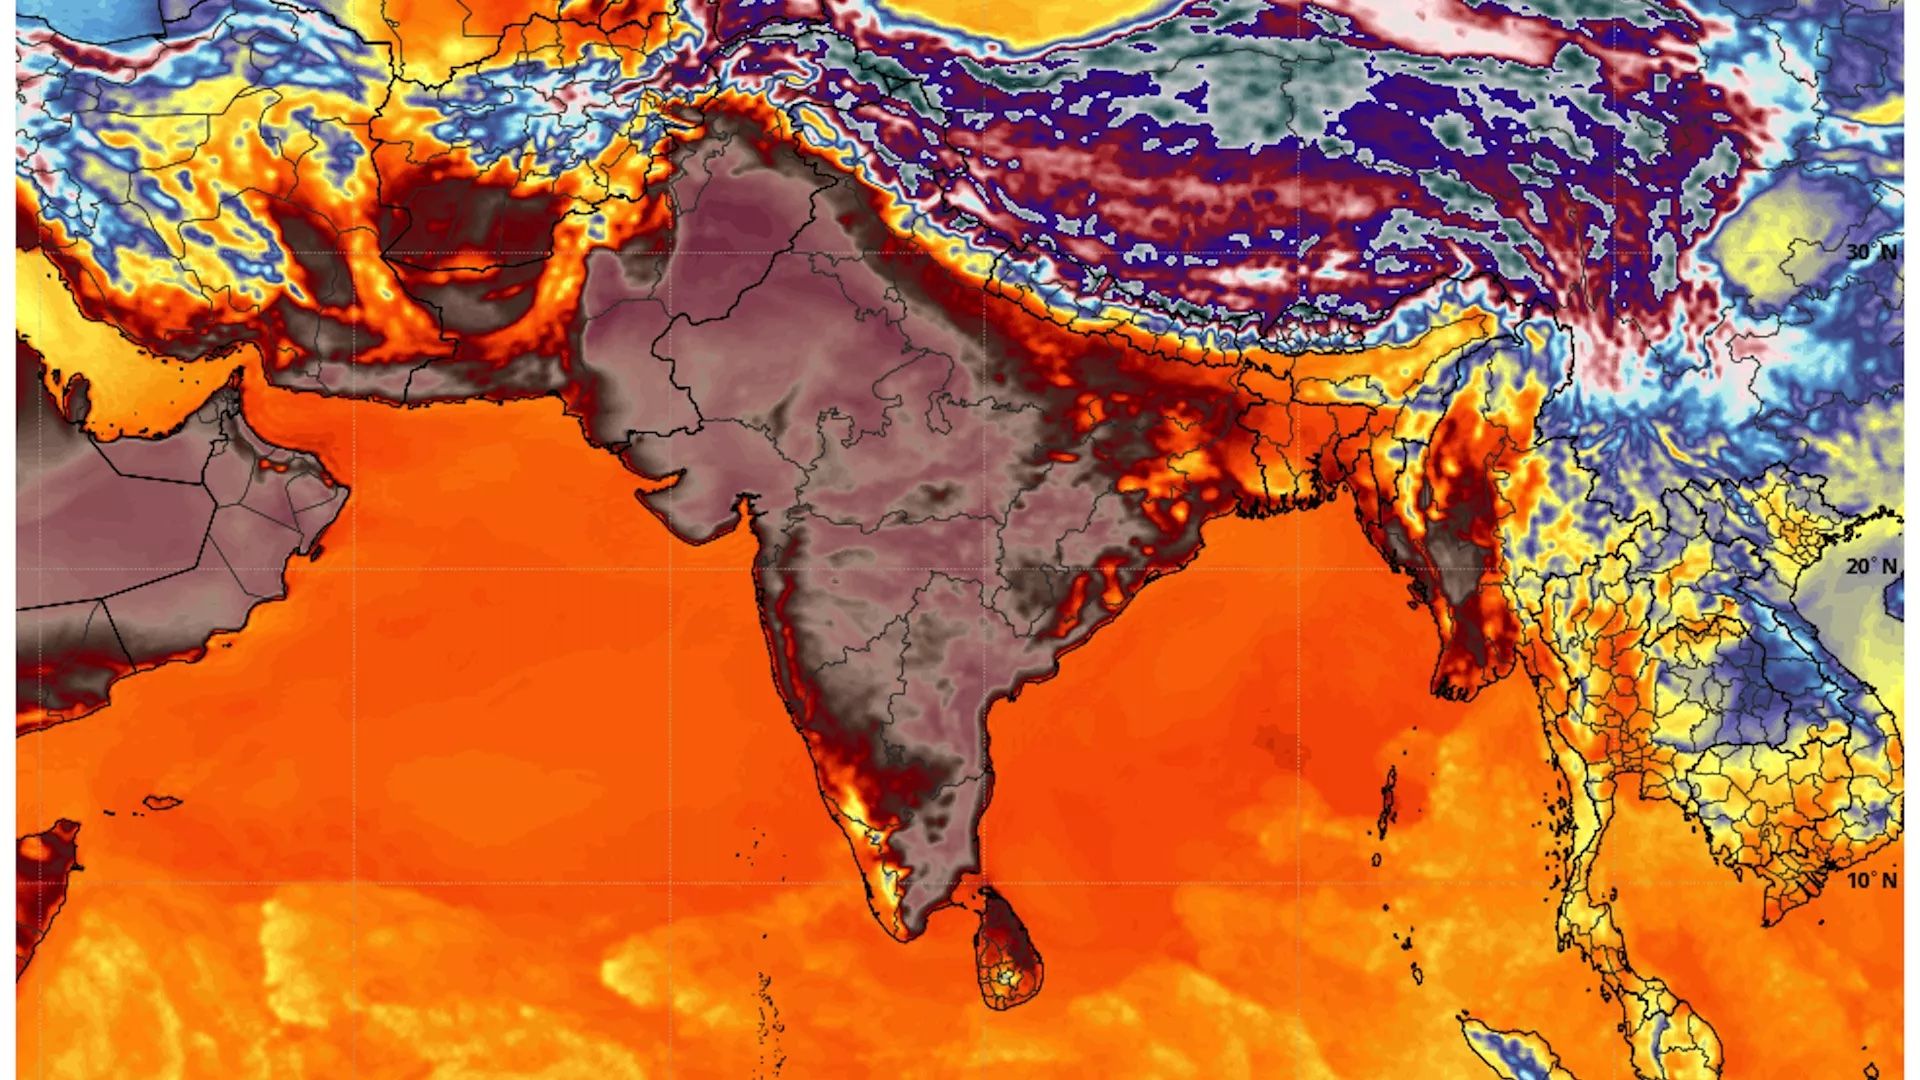 Computer model projection of high temperatures on May 2, showing the hottest conditions in northwestern India and Pakistan.